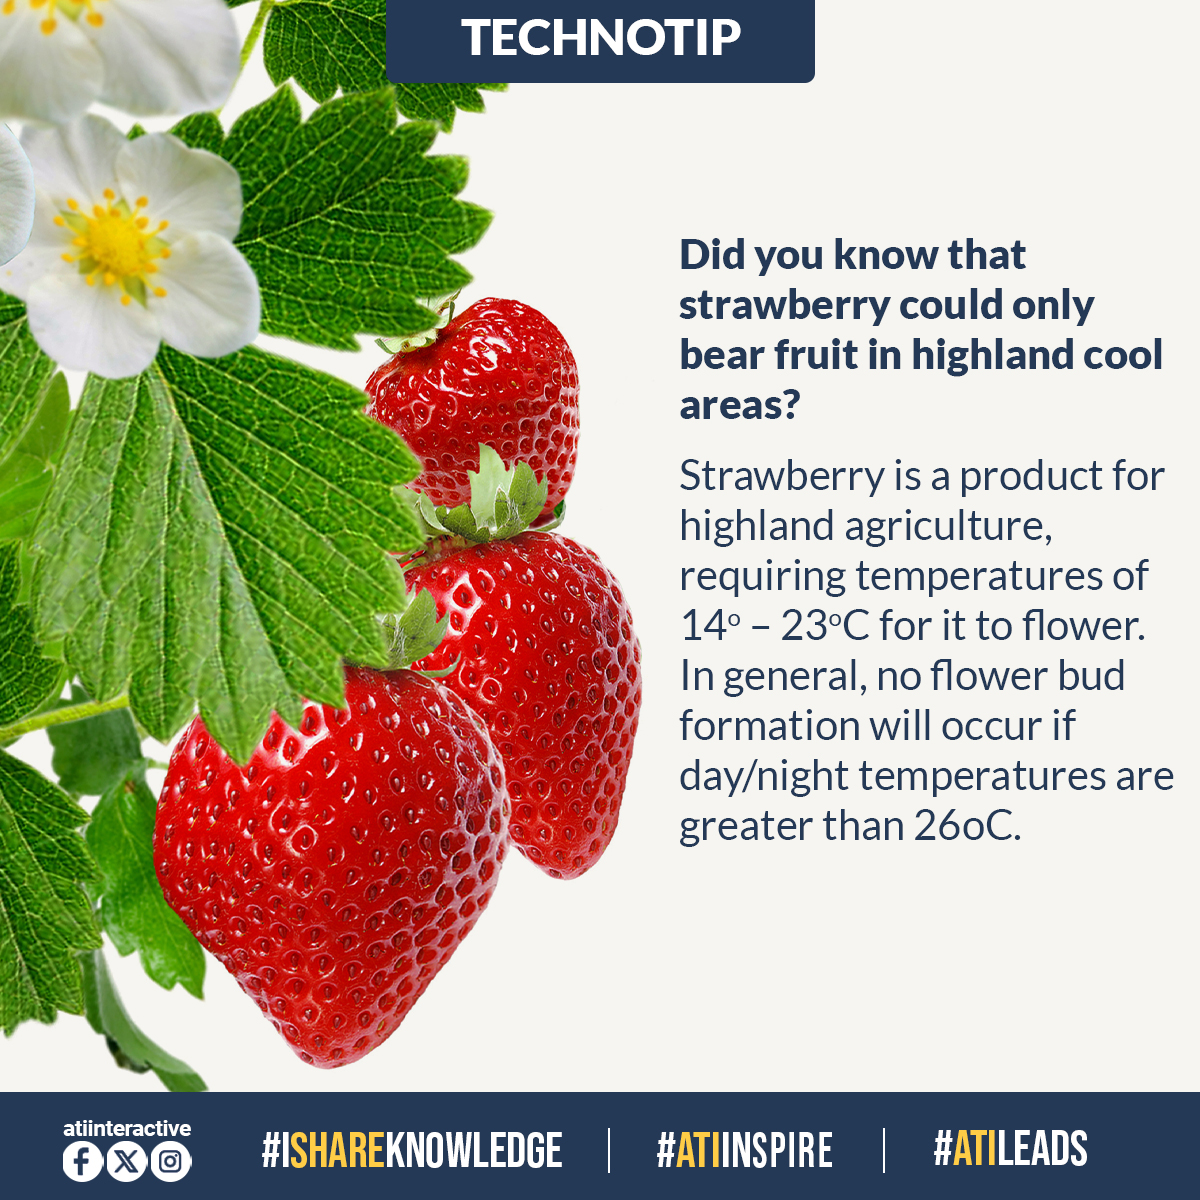 May be an image of strawberry and text that says 'TECHNOTIP Did you know that strawberry could only bear fruit in highland cool areas? Strawberry is product for highland agriculture, requiring temperatures of 14°- 23°C for it to flower. In general, no flower bud formation will occur if day/night temperatures are greater than 26oC. atiinteractive fxoam #ISHAREKNOWLEDGE #ATIINSPIRE #ATILEADS'